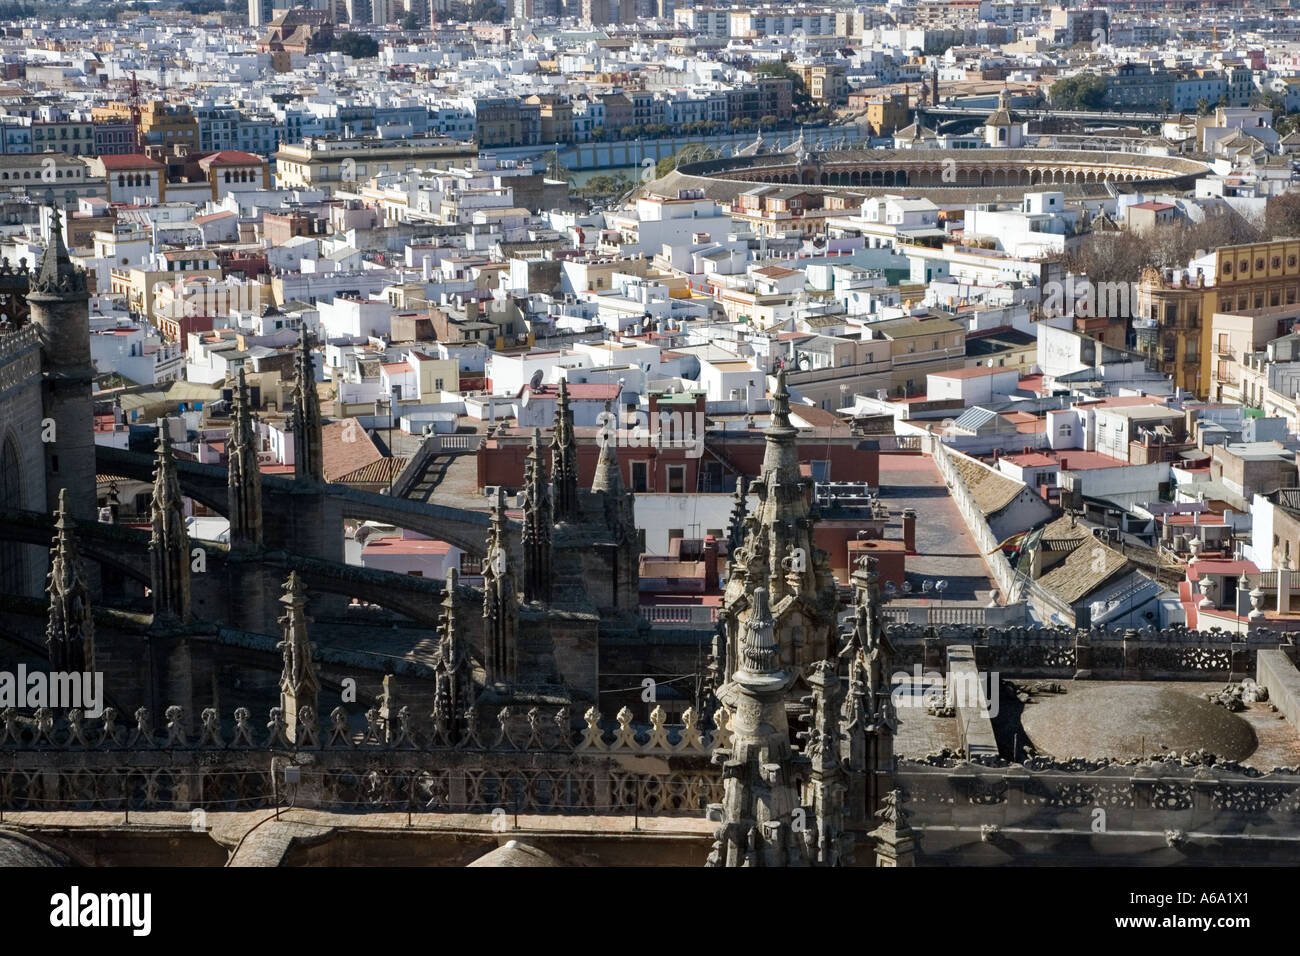 The roof of Seville's cathedral with Maestranza bullring on background as seen looking westward from Giralda tower Stock Photo